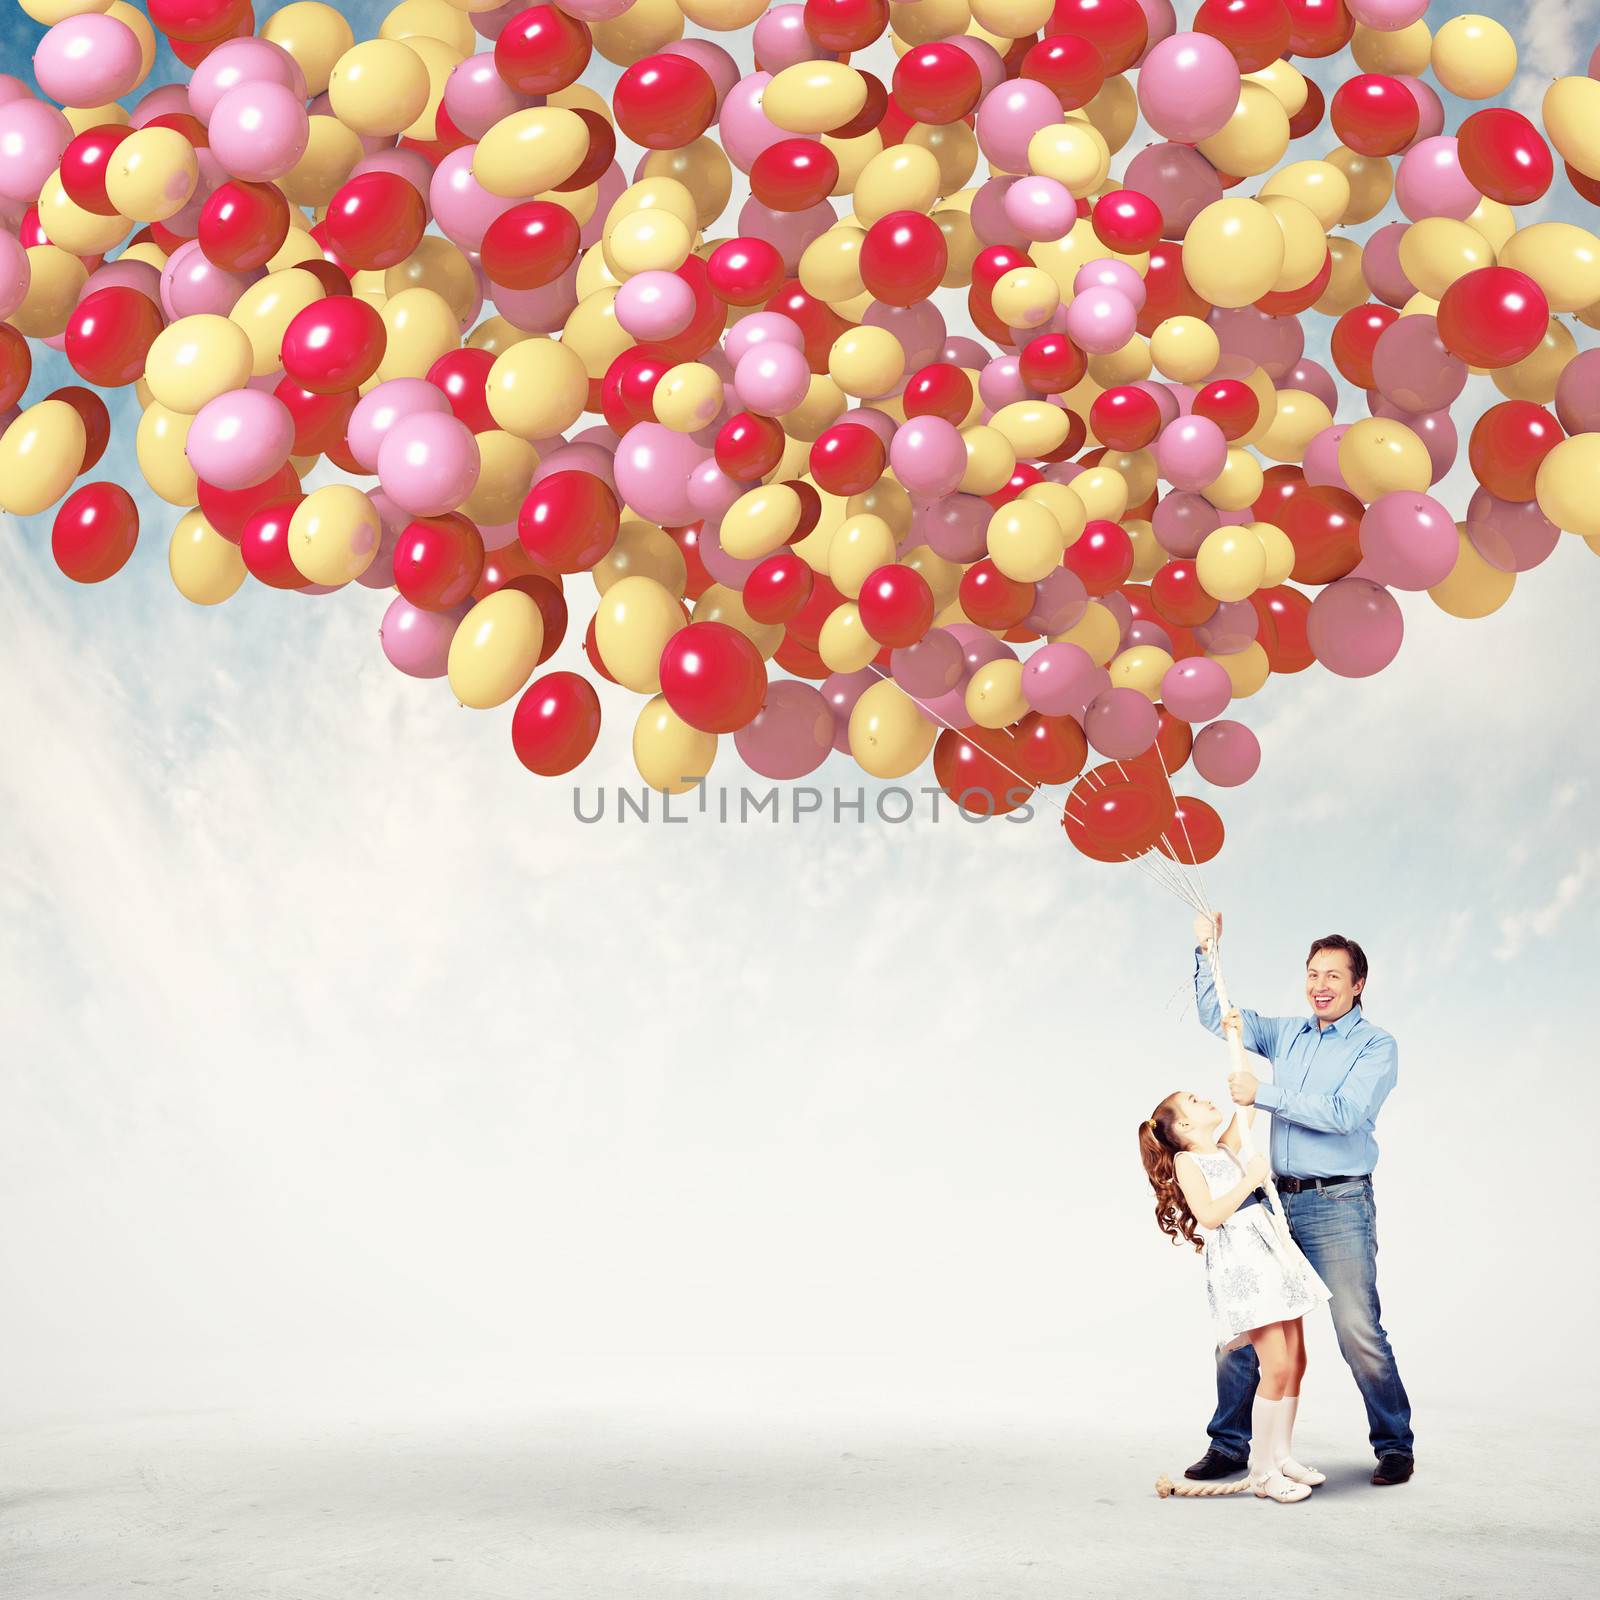 Image of father and daughter holding bunch of colorful balloons